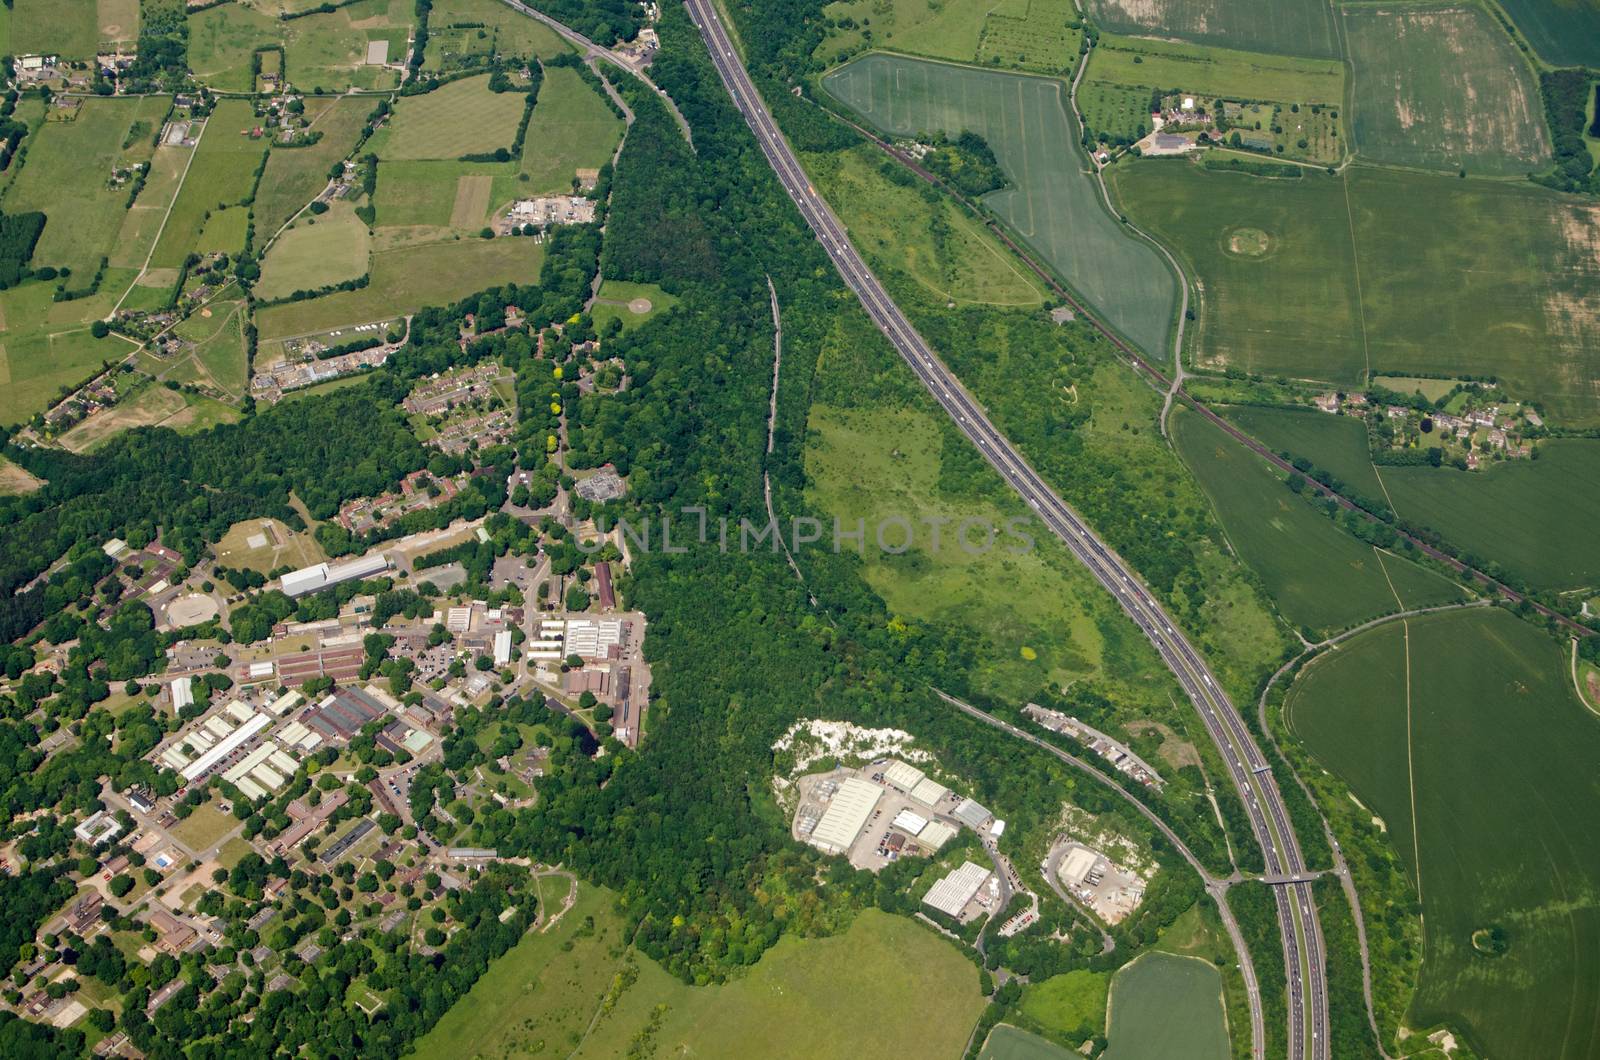 Aerial view of Fort Halstead, home to the Defence Science and Technology Laboroatory run by Qinetiq for the Ministry of Defence.  Sunny summer day near Sevenoaks, Kent with the M25 motorway, railway line and some ancient tumulii visible in the fields.